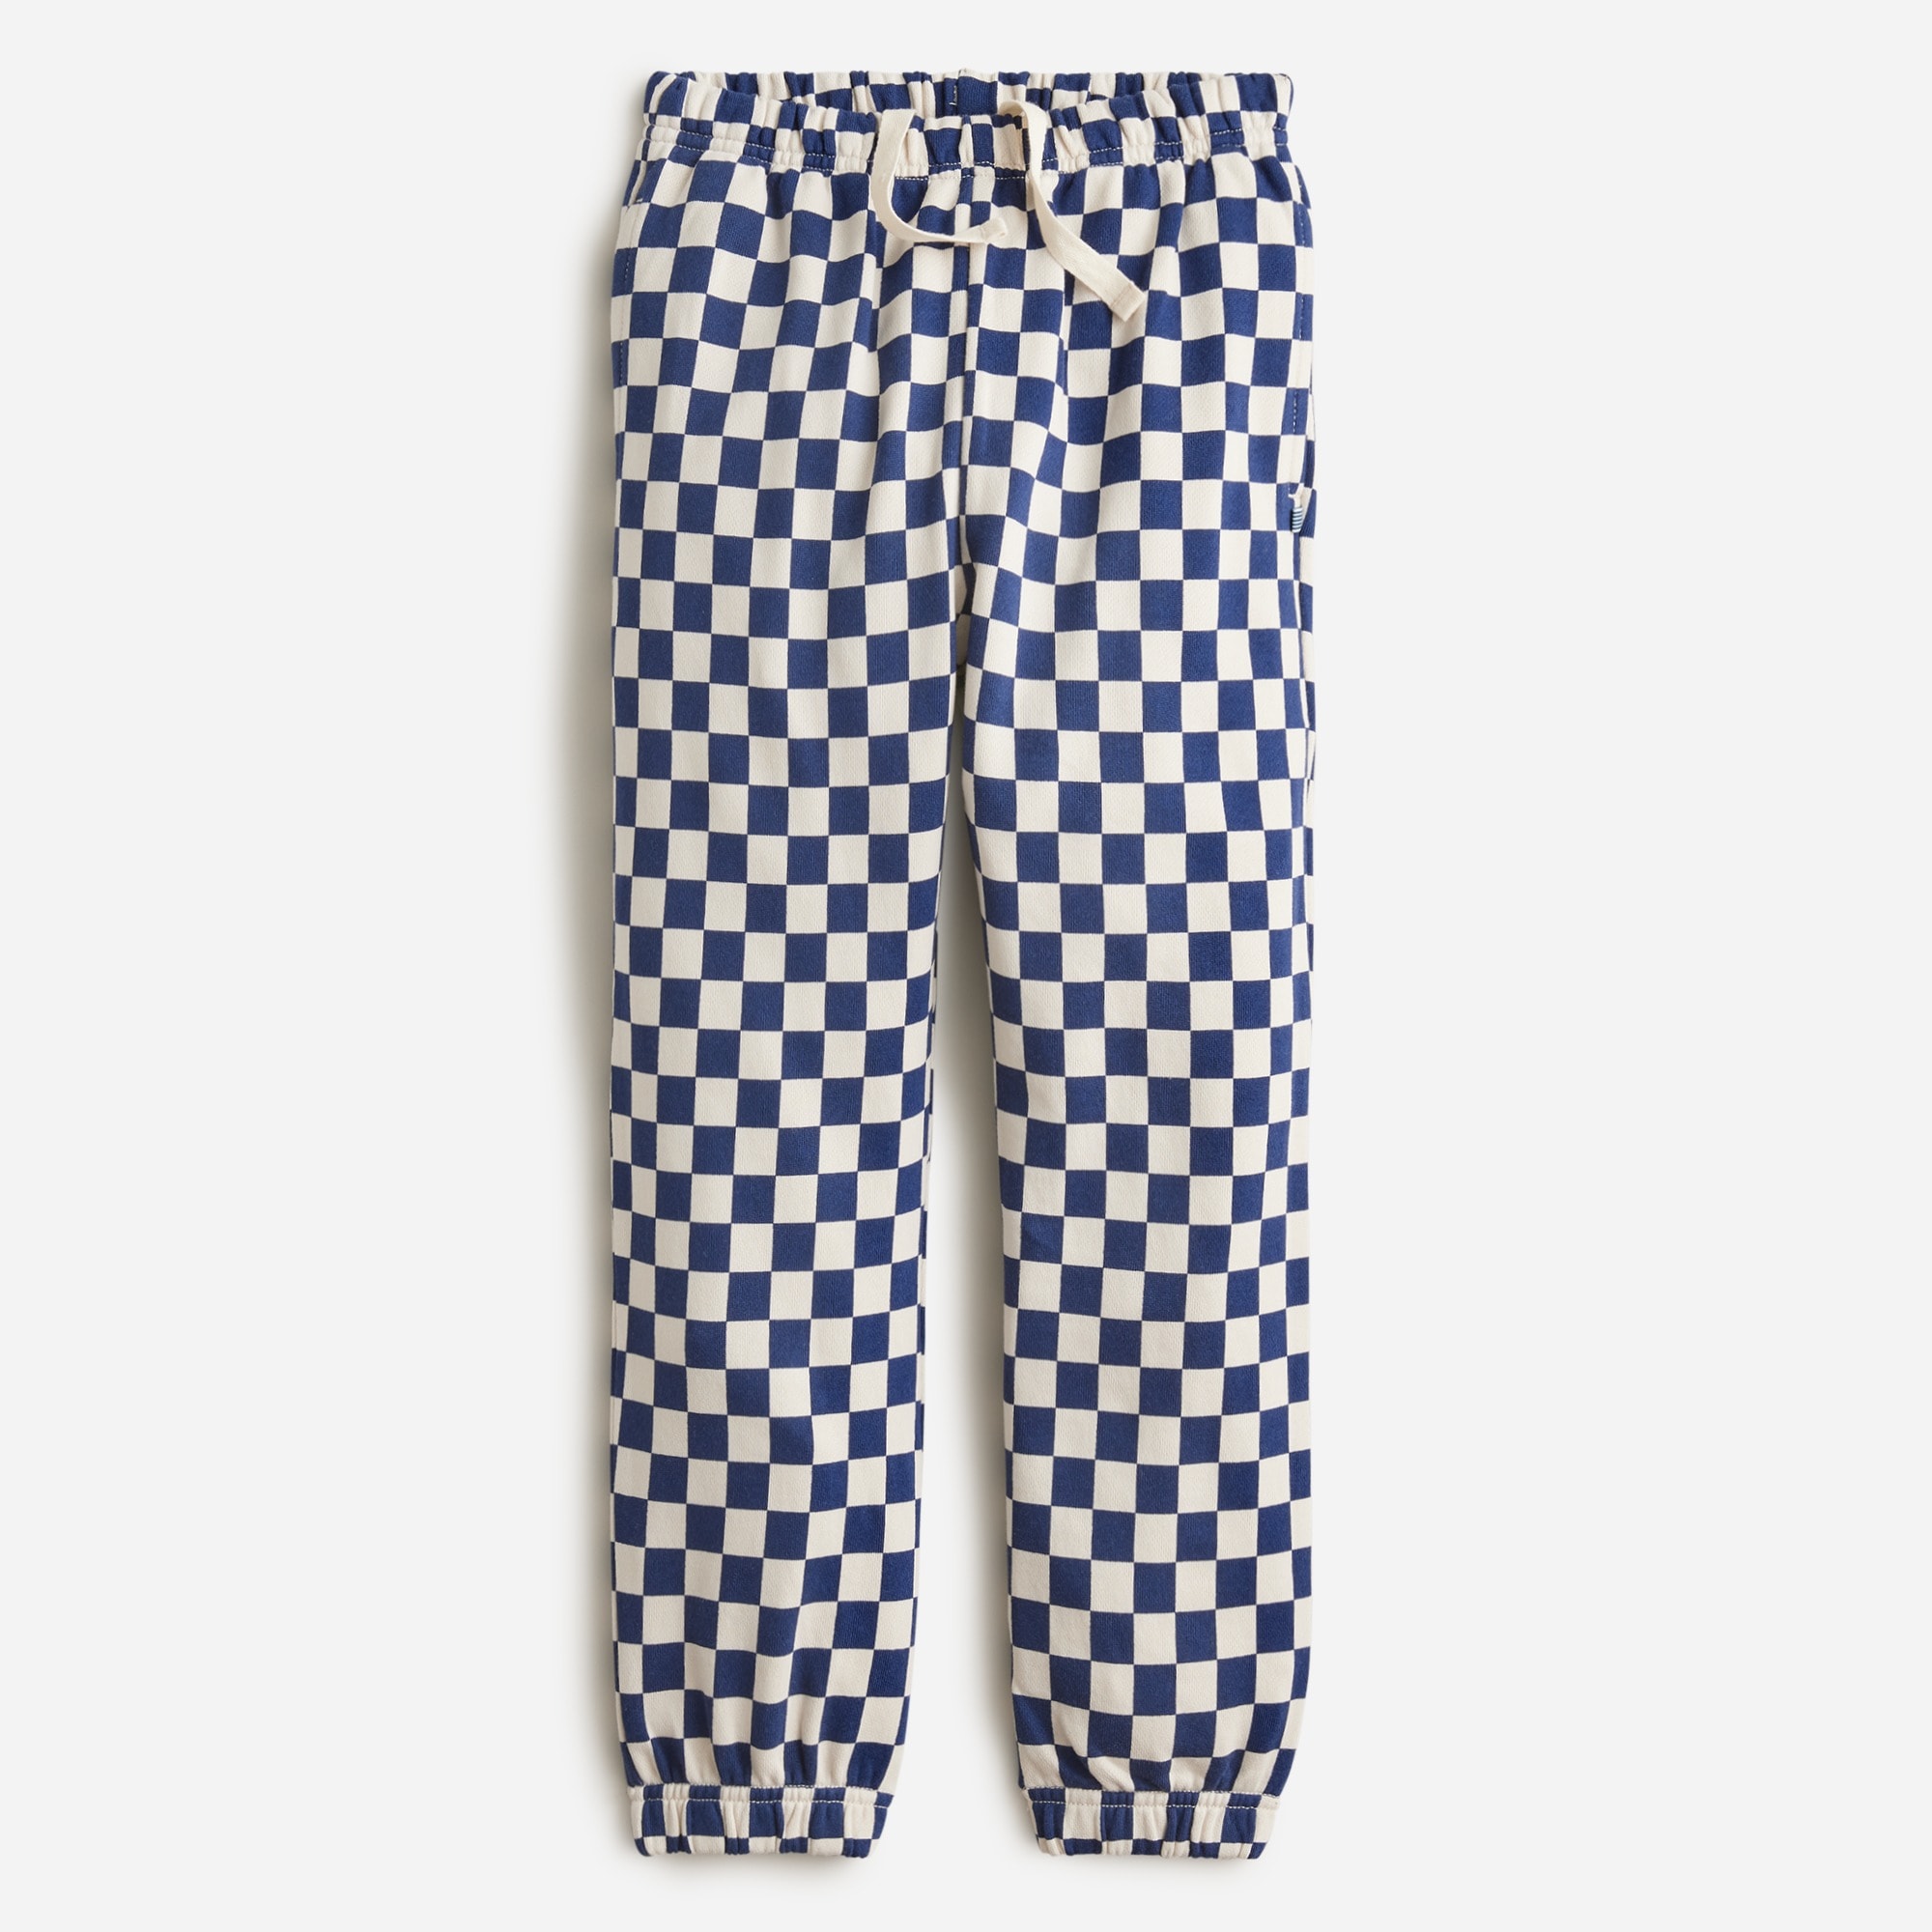  KID by Crewcuts garment-dyed sweatpant in checkerboard print